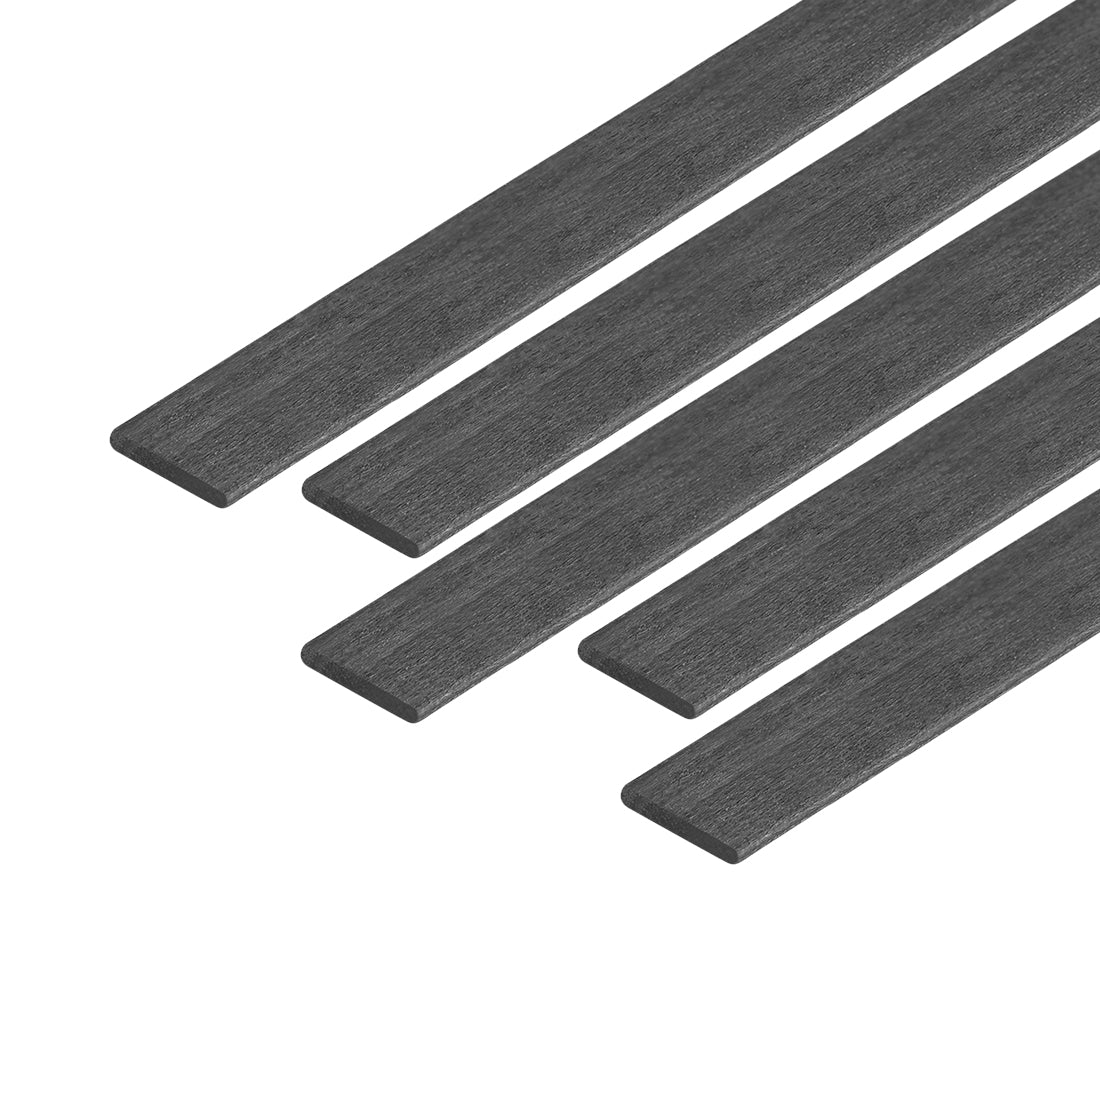 uxcell Uxcell Carbon Fiber Strip Bars 1x5mm 400mm Length Pultruded Carbon Fiber Strips for Kites, RC Airplane 5 Pcs